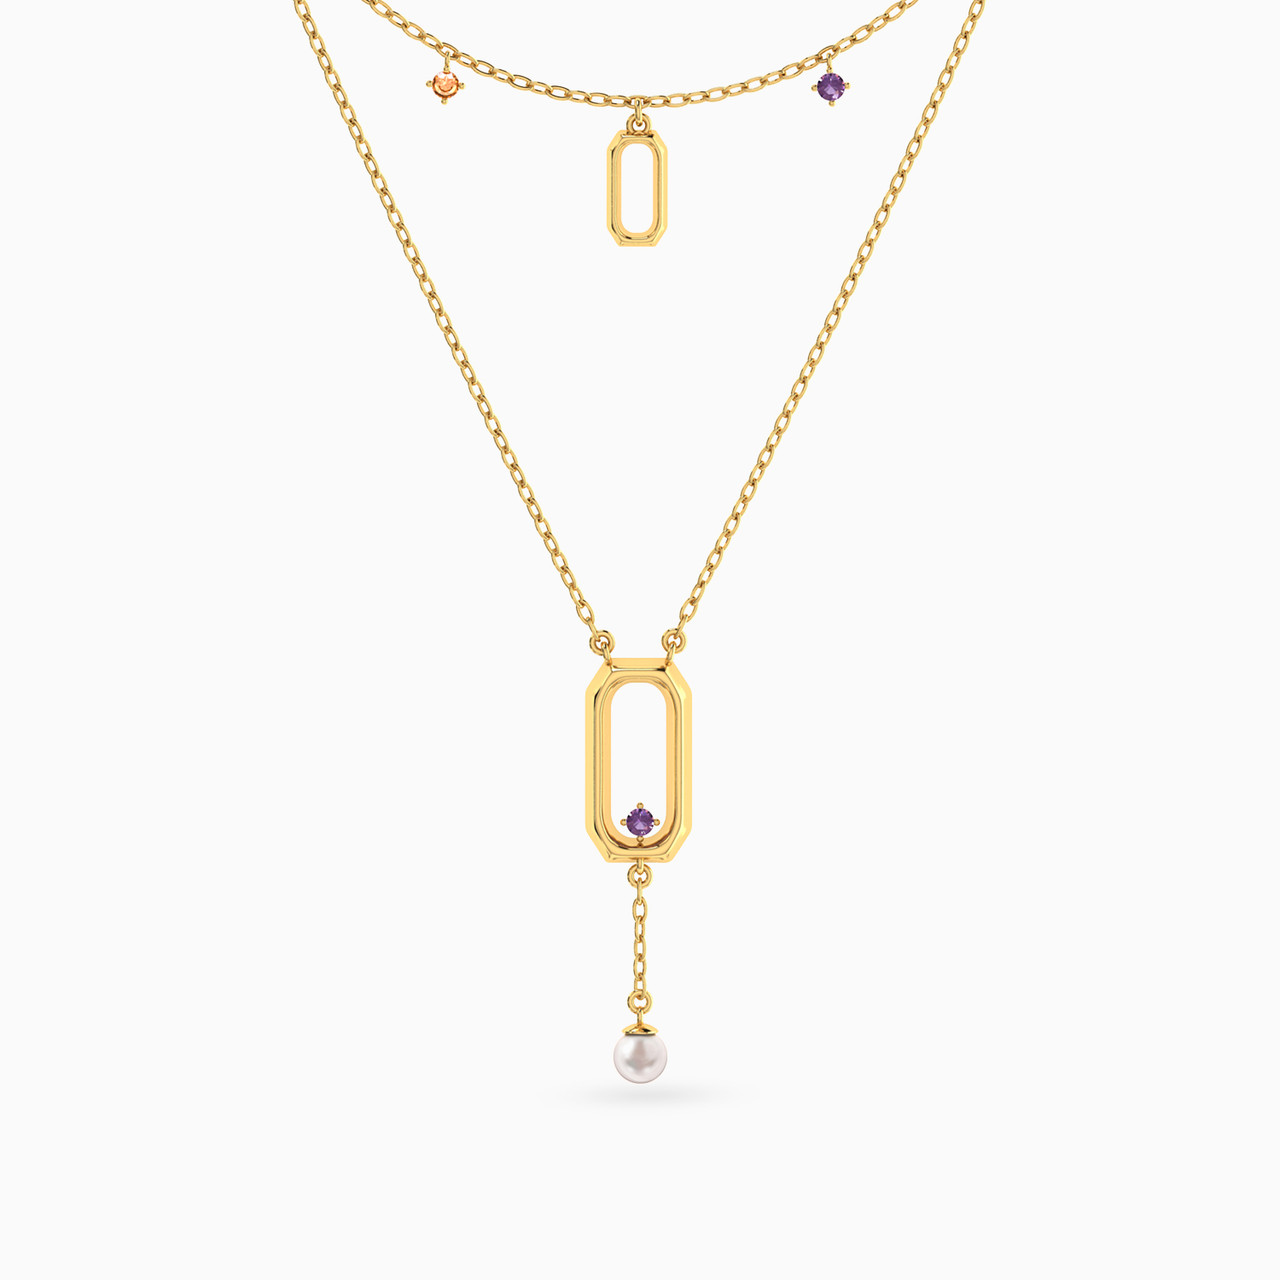 14K Gold Pearl & Colored Stones Pendant Necklace